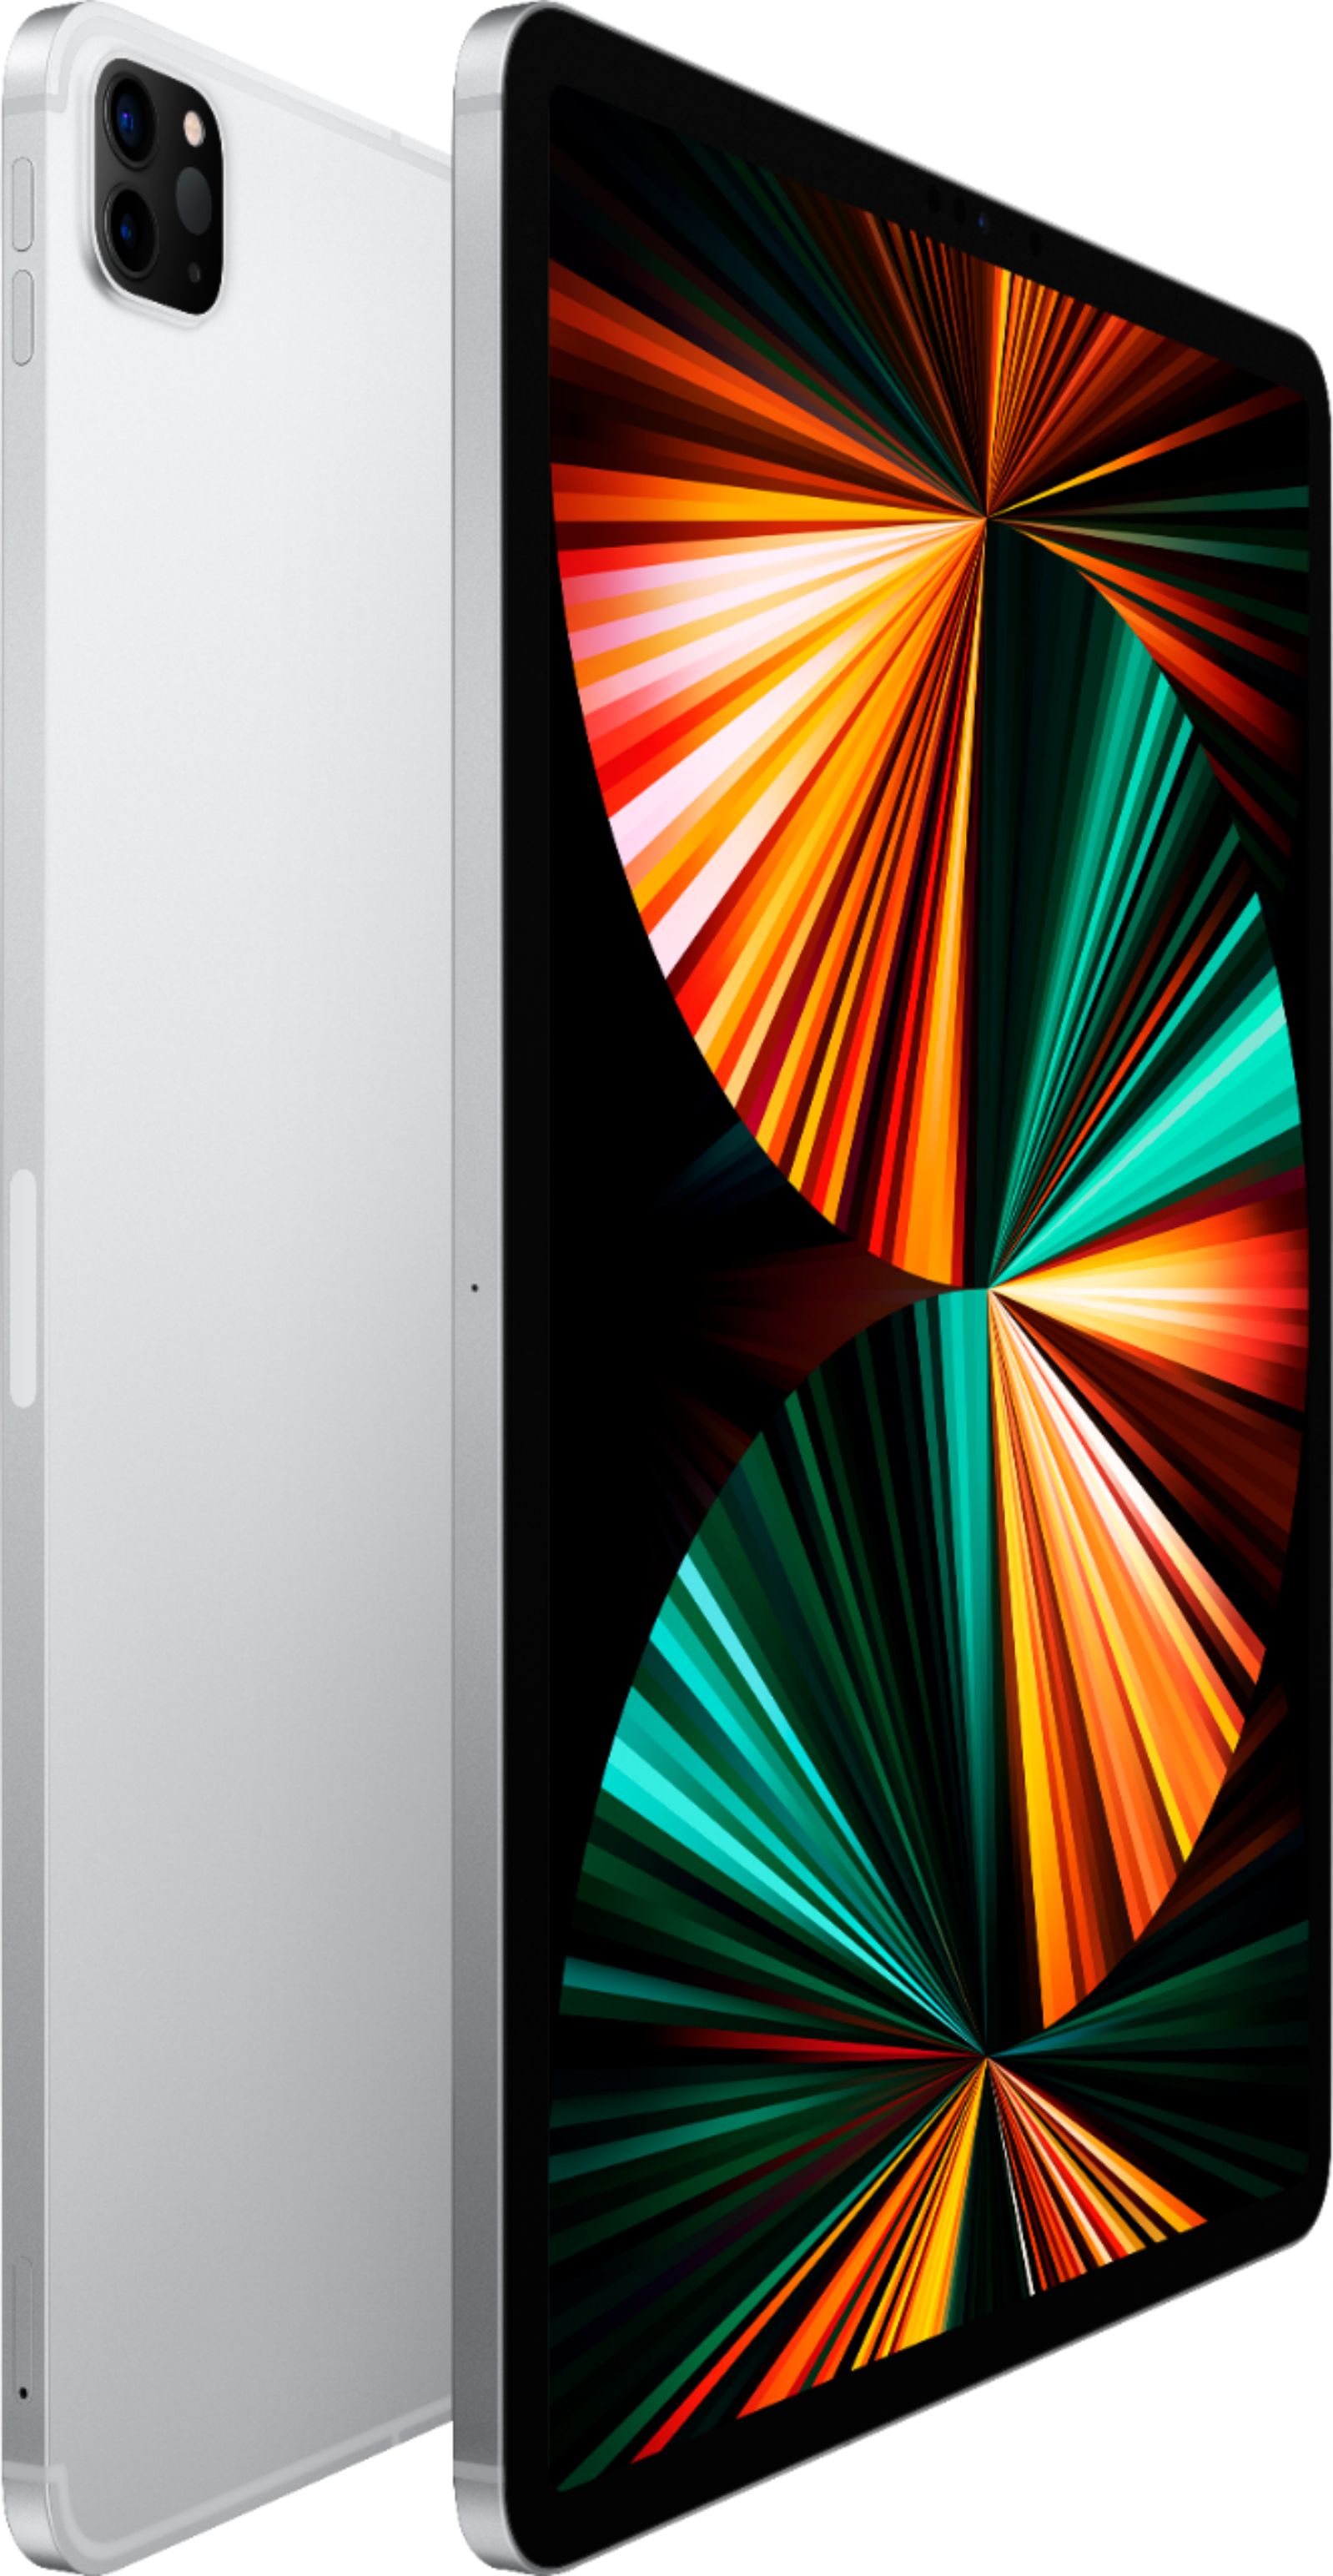 Apple 12.9-Inch iPad Pro (Latest Model) with Wi-Fi + Cellular 